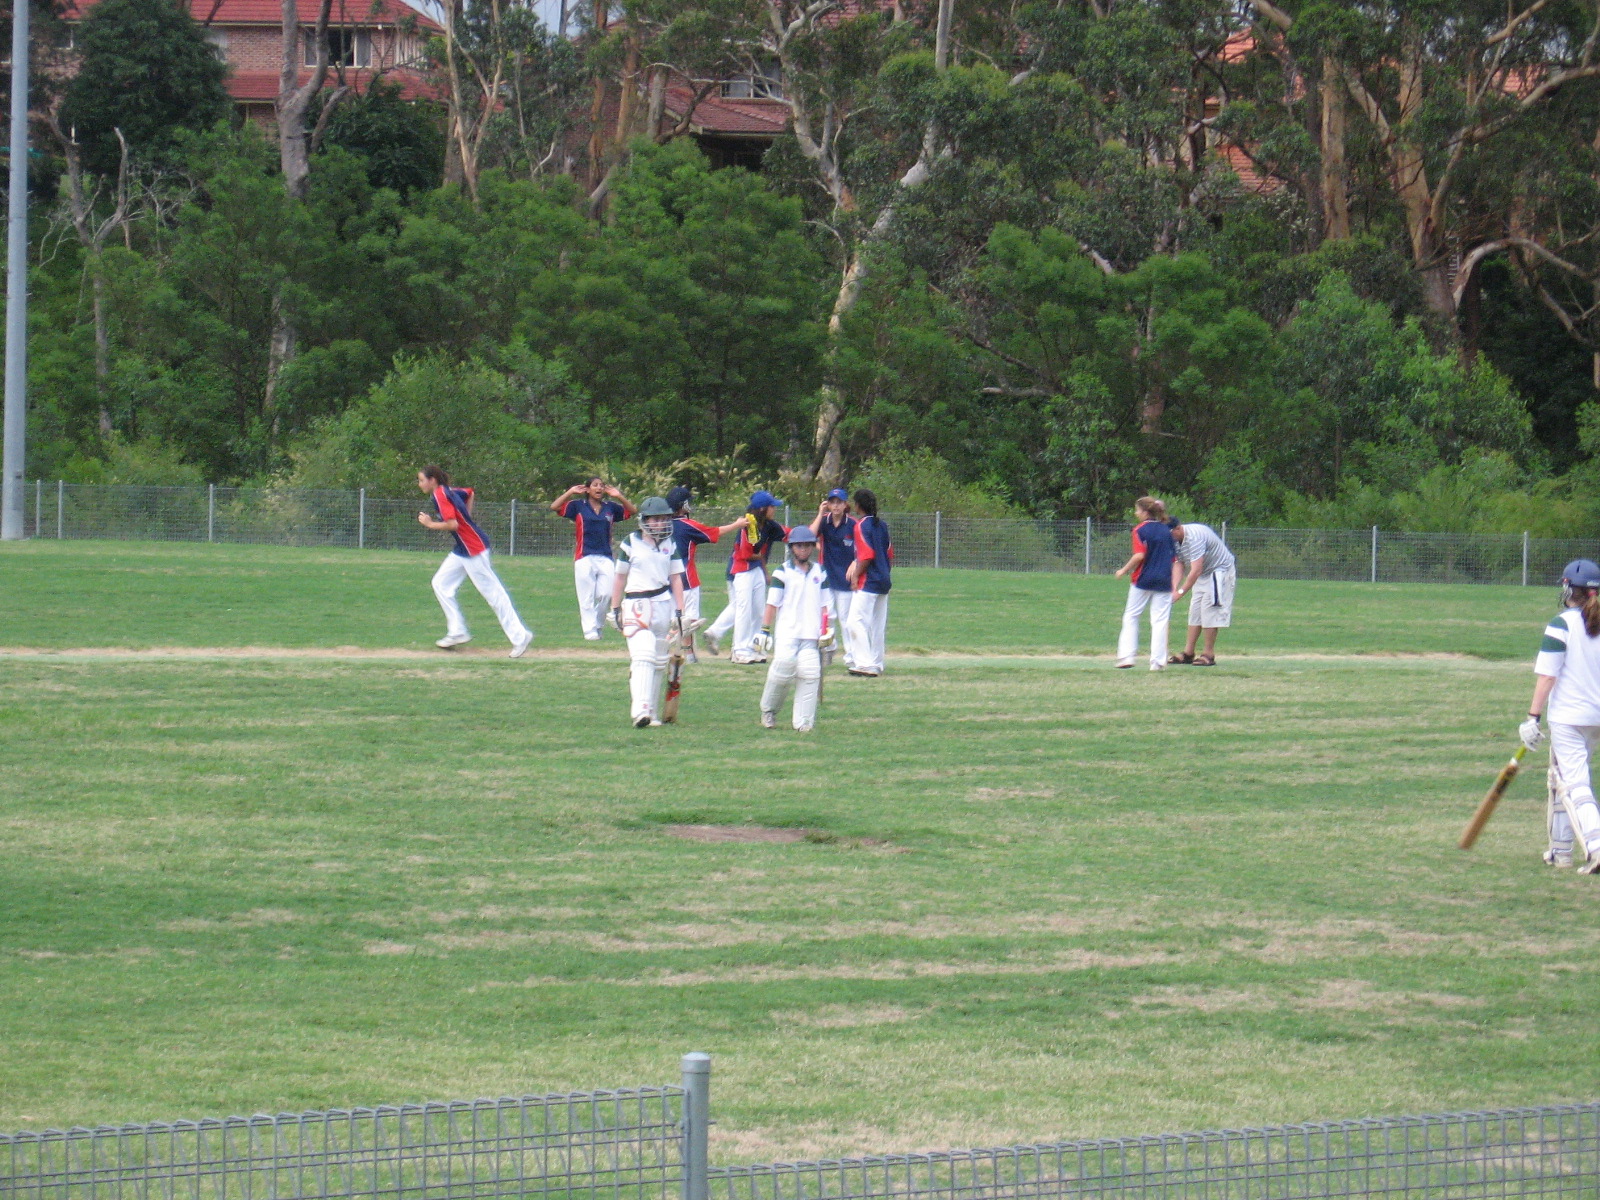 Girls cricket - Fred Caterson Reserve 2008/09 season